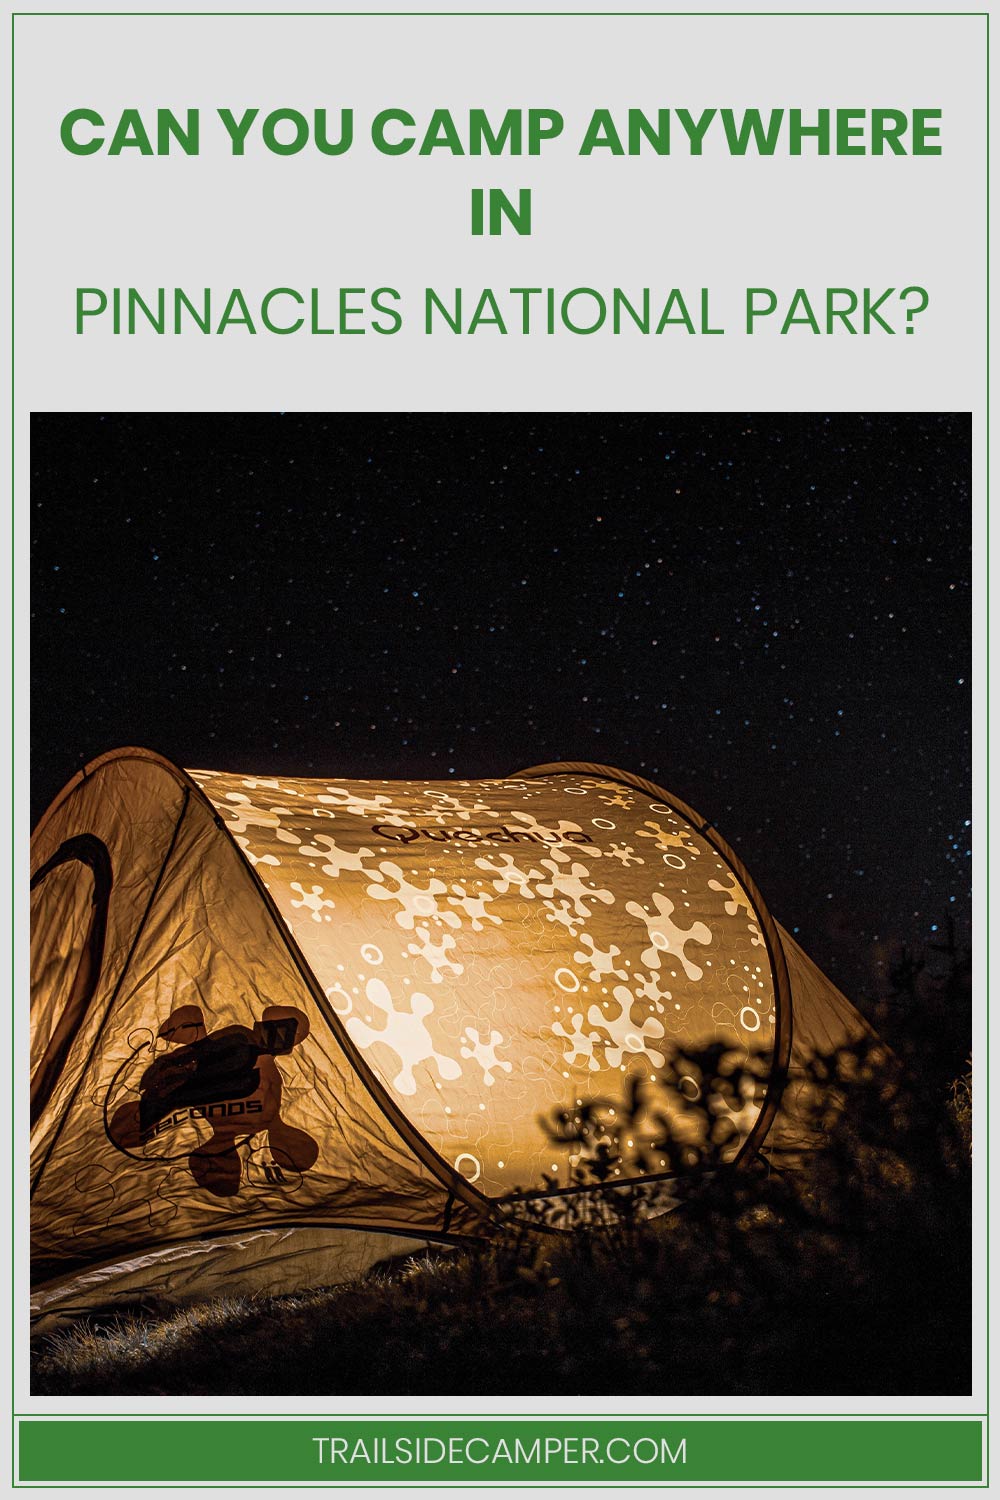 Can You Camp Anywhere In Pinnacles National Park?